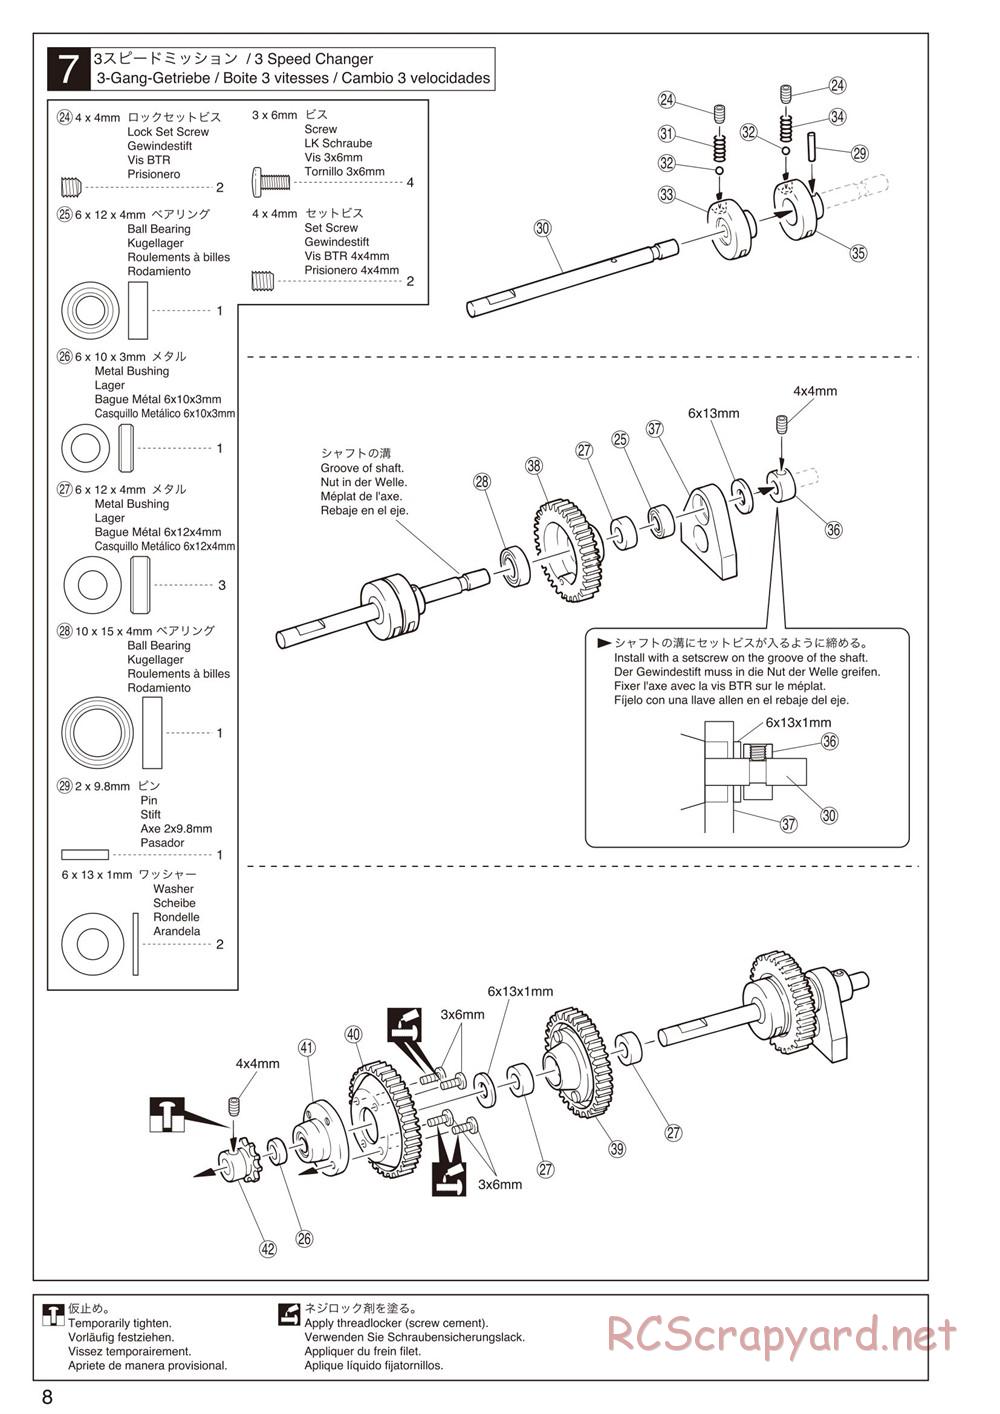 Kyosho - Mad Force Cruiser - Manual - Page 8